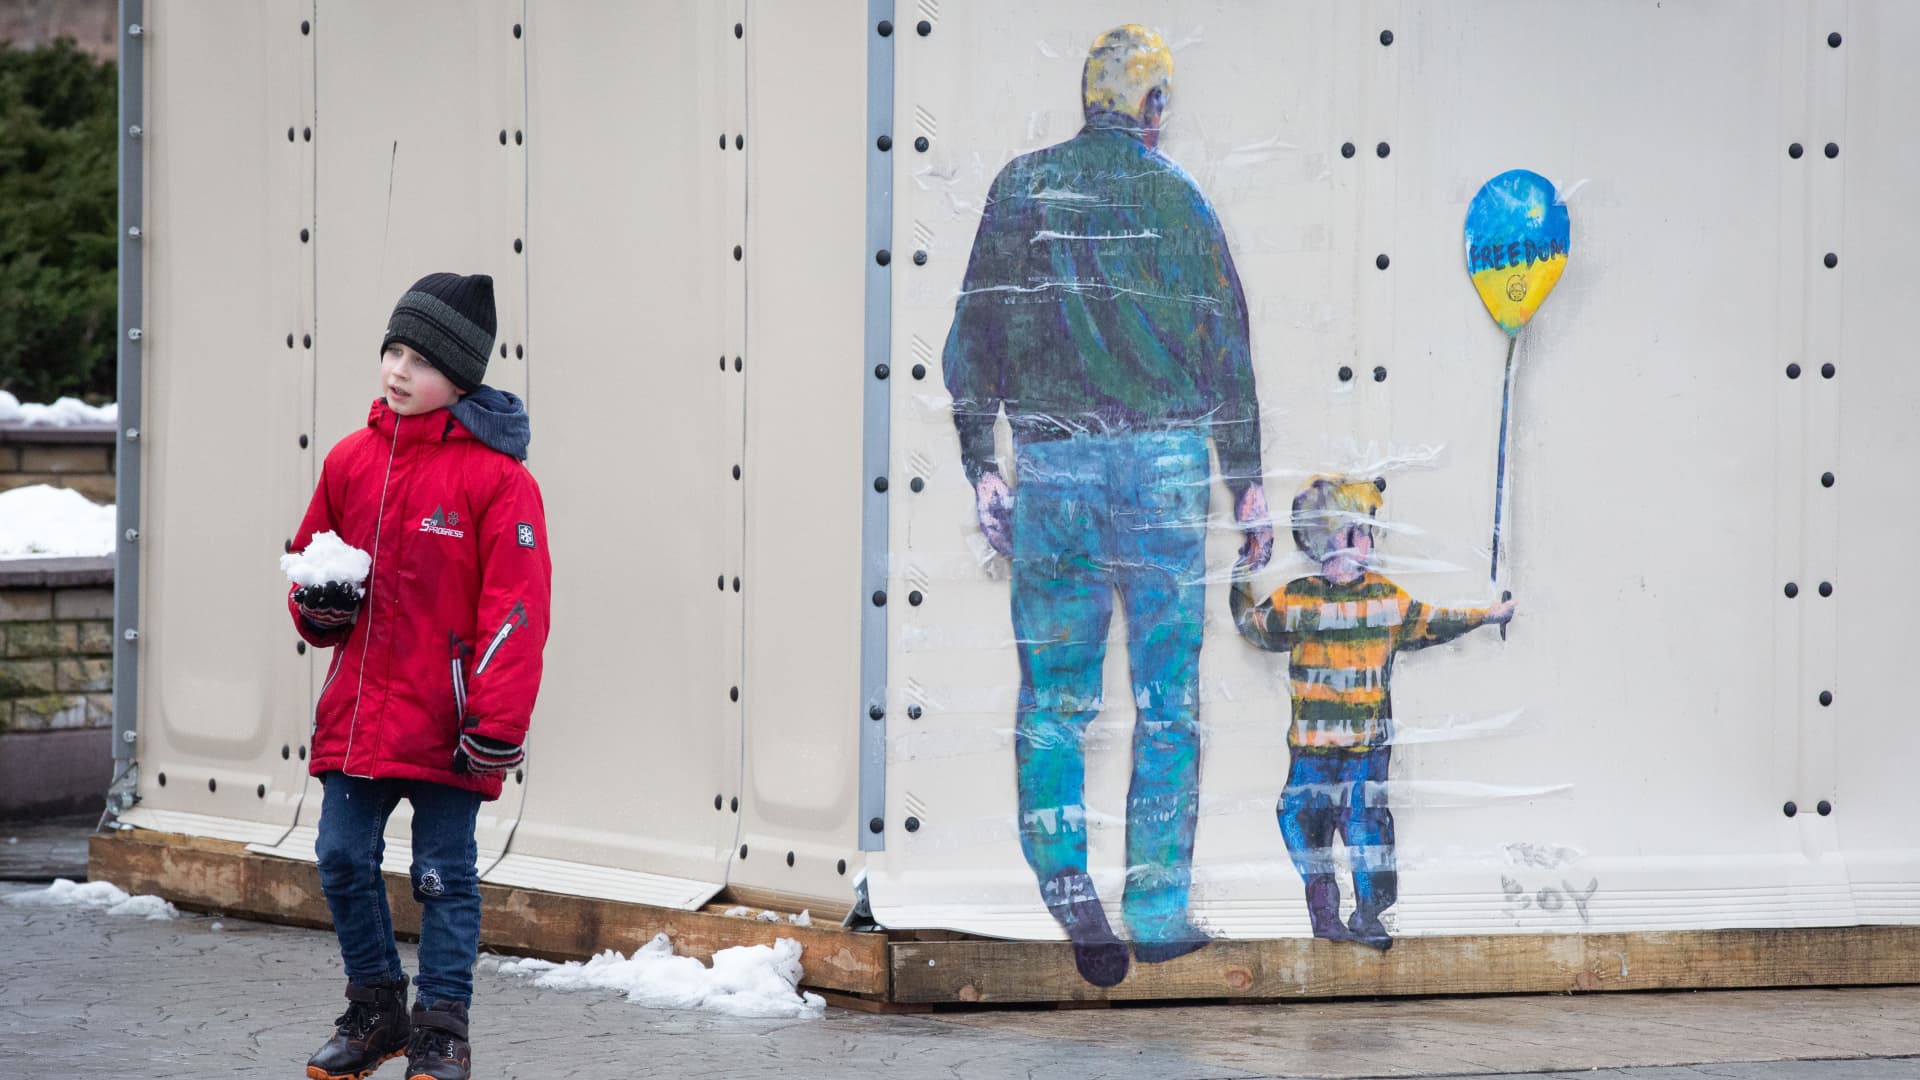 A boy stands next to an art work by famous Italian street artist Tvboy in the center of the town of Bucha, near Kyiv, Ukraine, on February 2, 2023. 